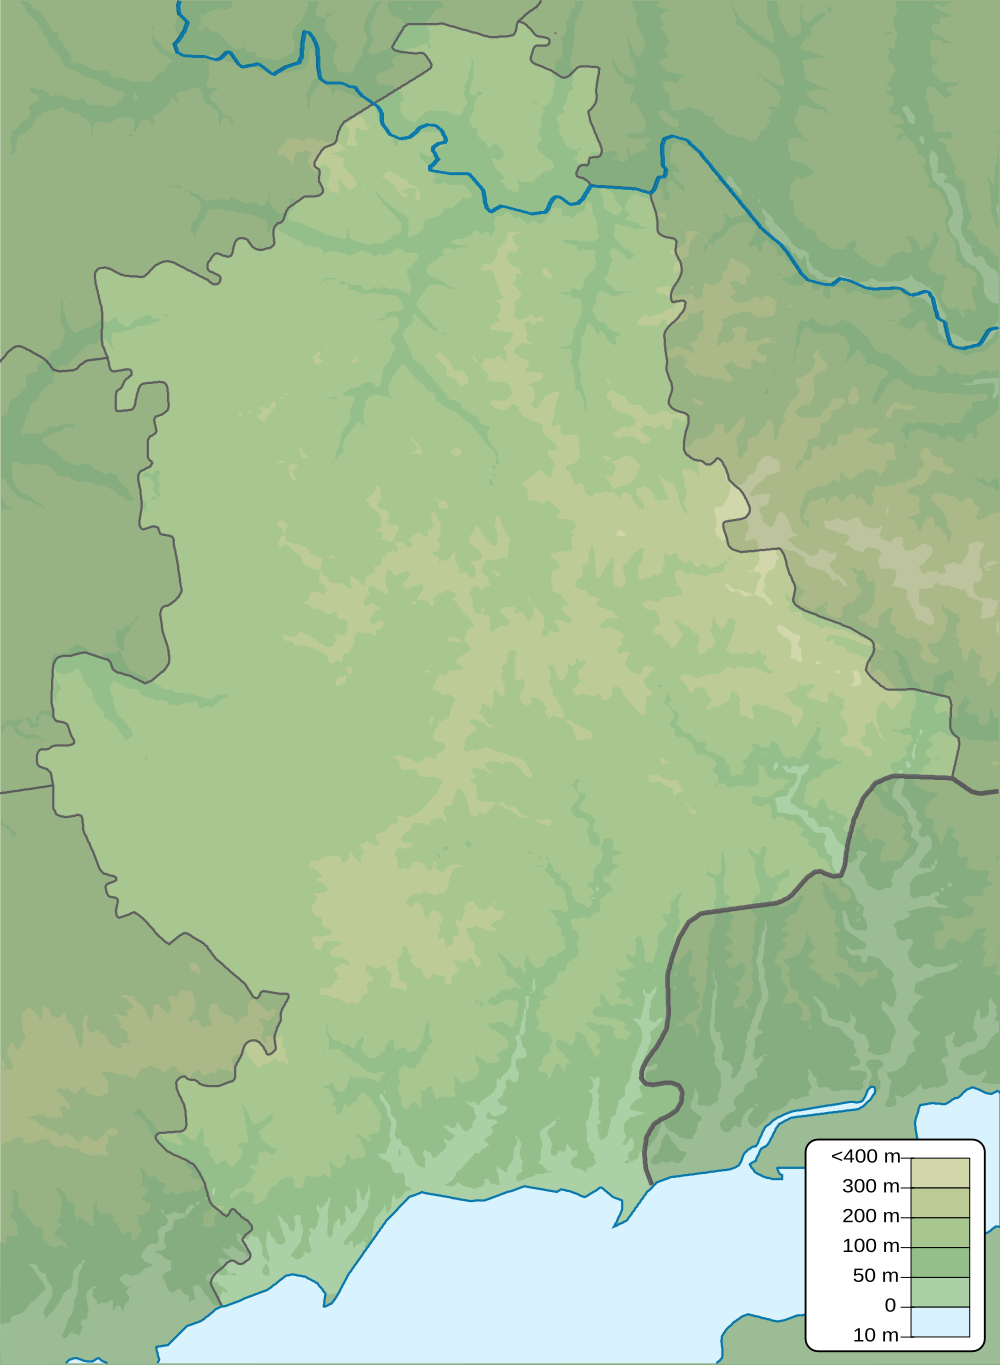 Russo-Ukrainian War detailed relief map (oblasts) is located in Donetsk Oblast